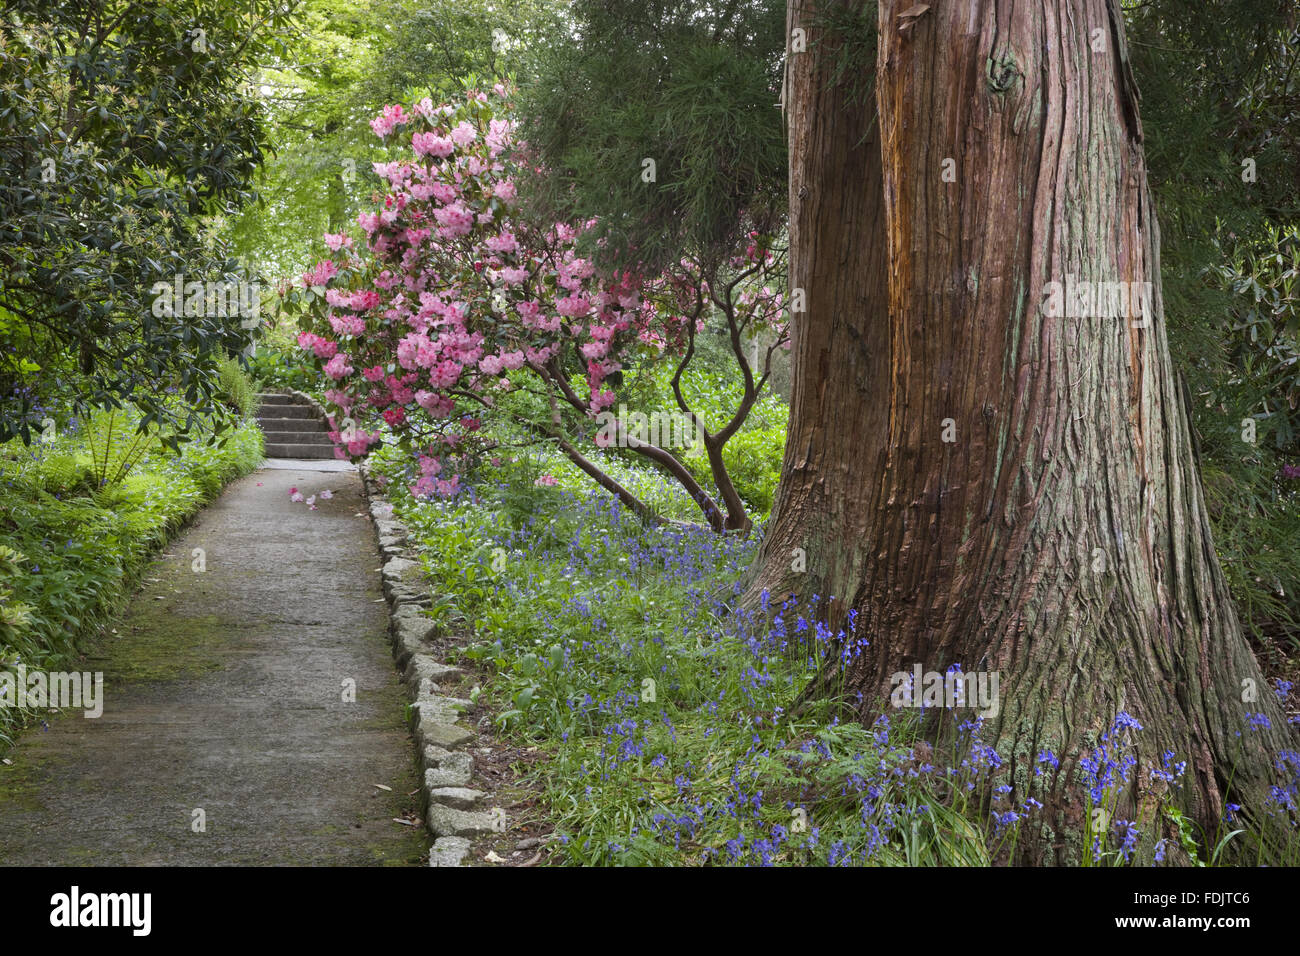 Woodland walk with azaleas and bluebells bordering the path at Trelissick Garden, Cornwall, in May. Stock Photo